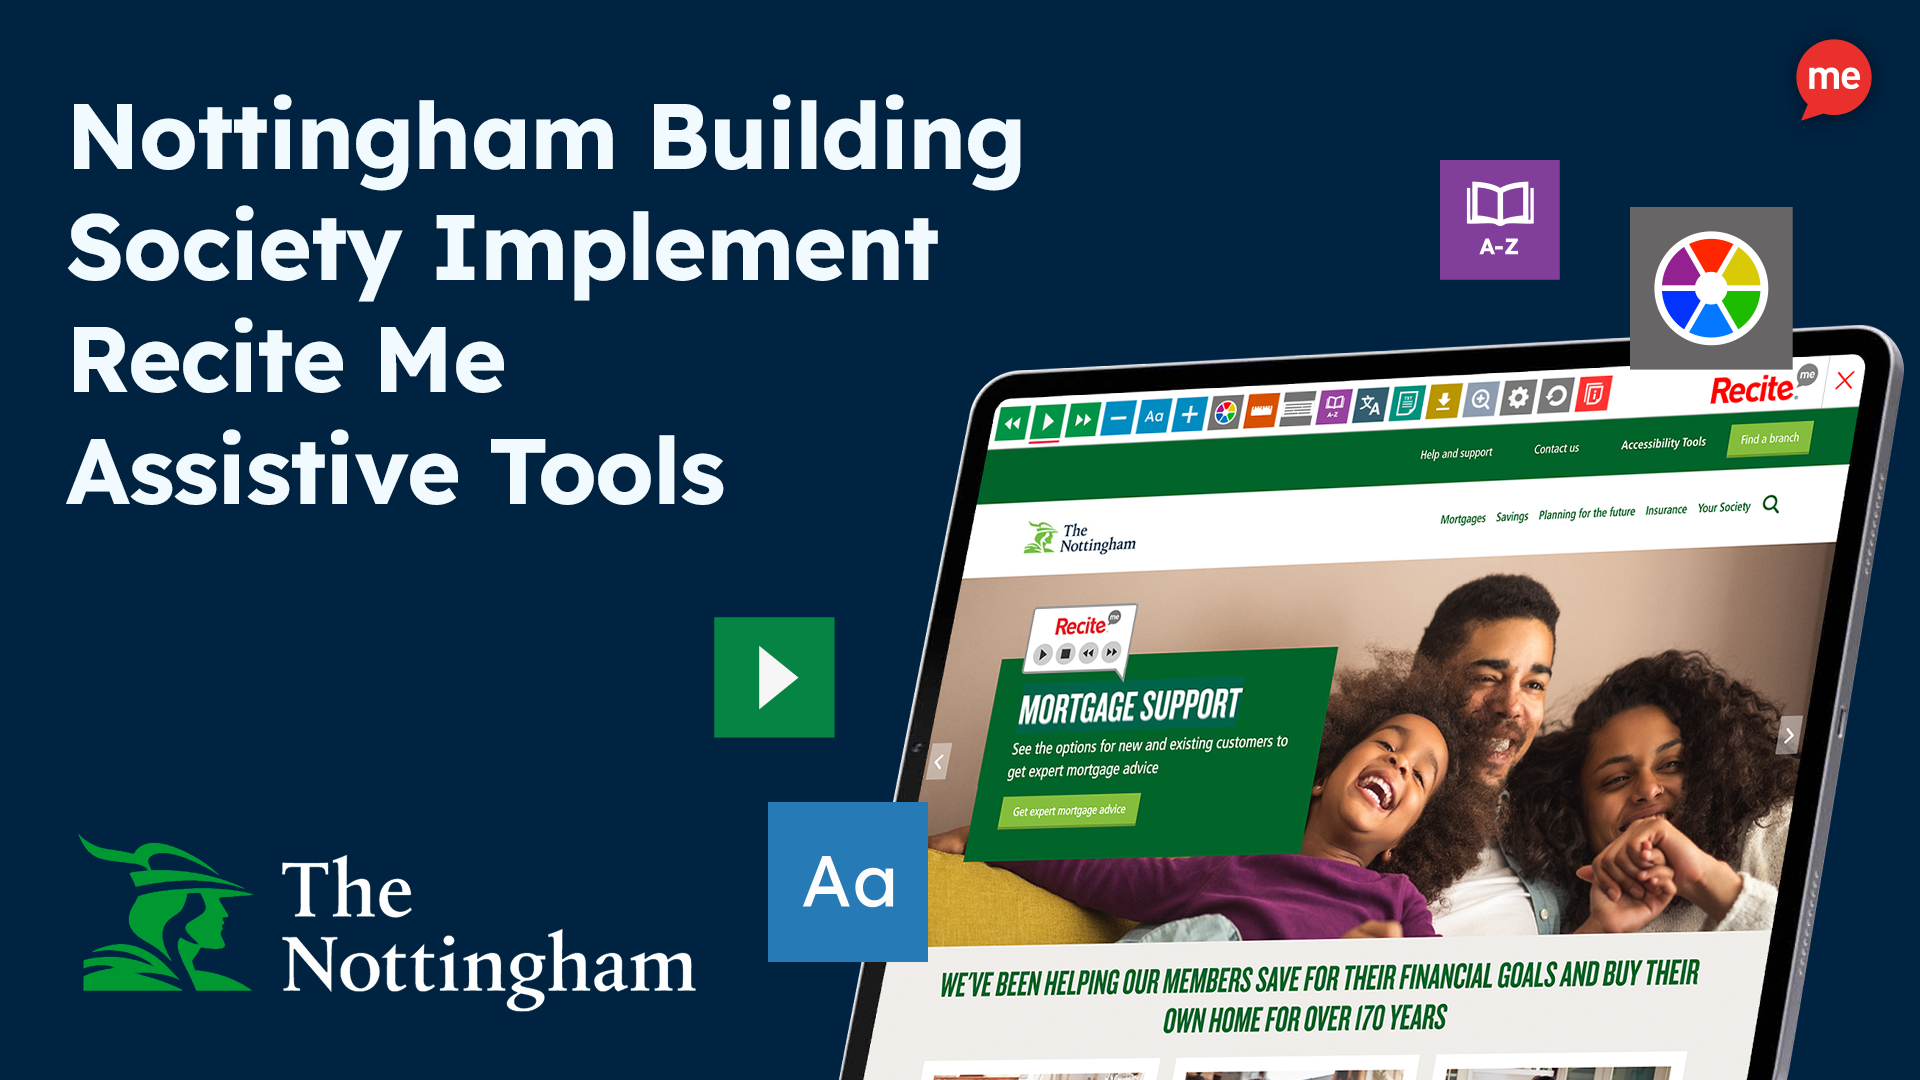 Nottingham Building Society Implement Recite Me Assistive Tools